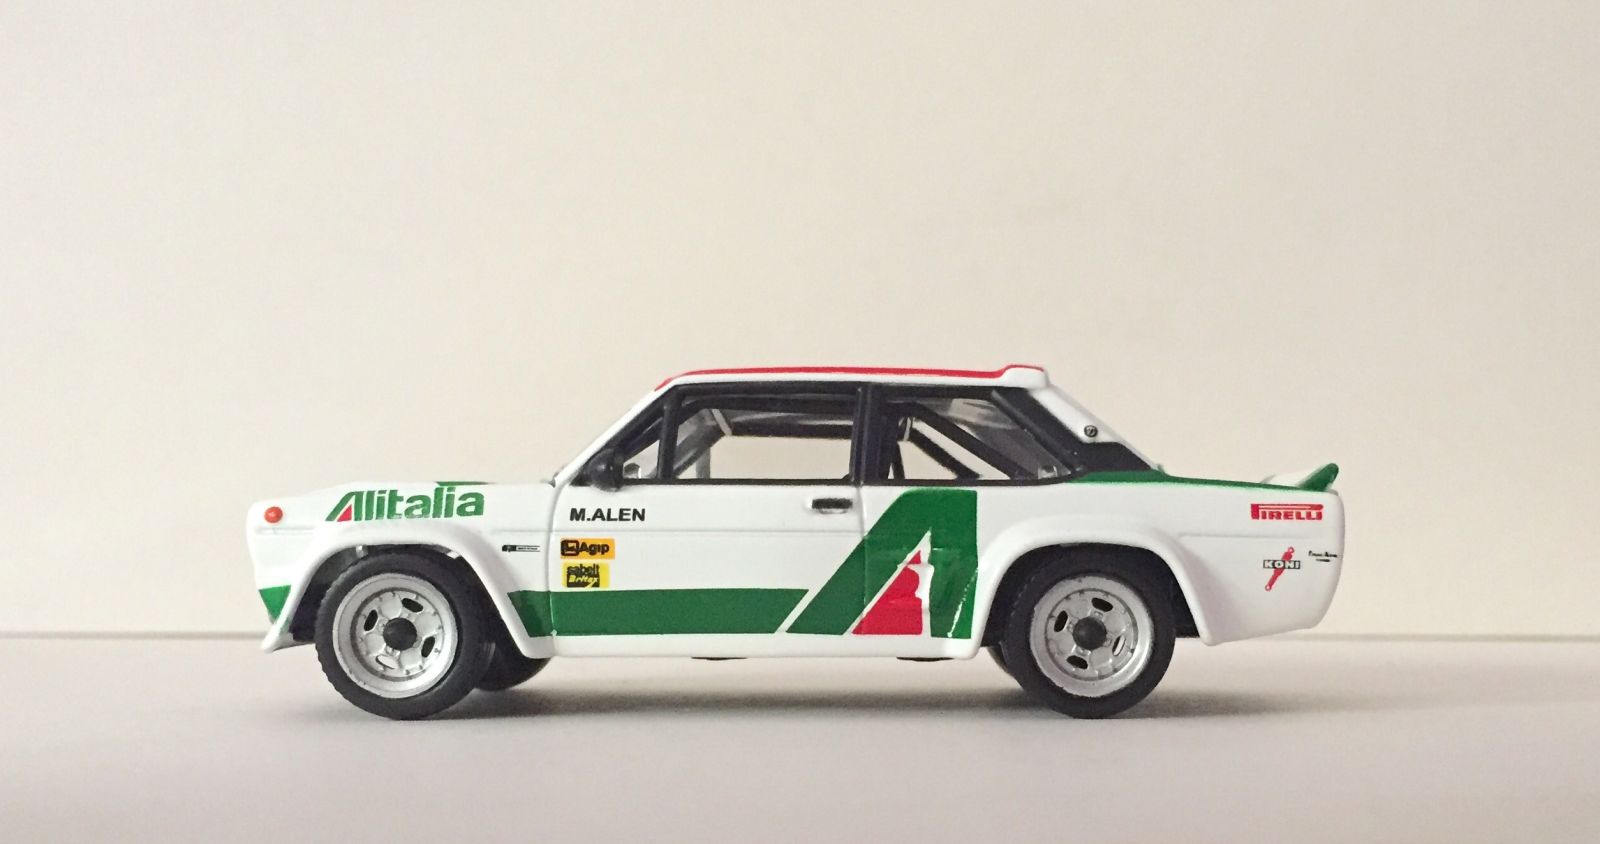 Illustration for article titled Spaghetti Sunday - Fiat 131 Abarth 1/43 by Burago